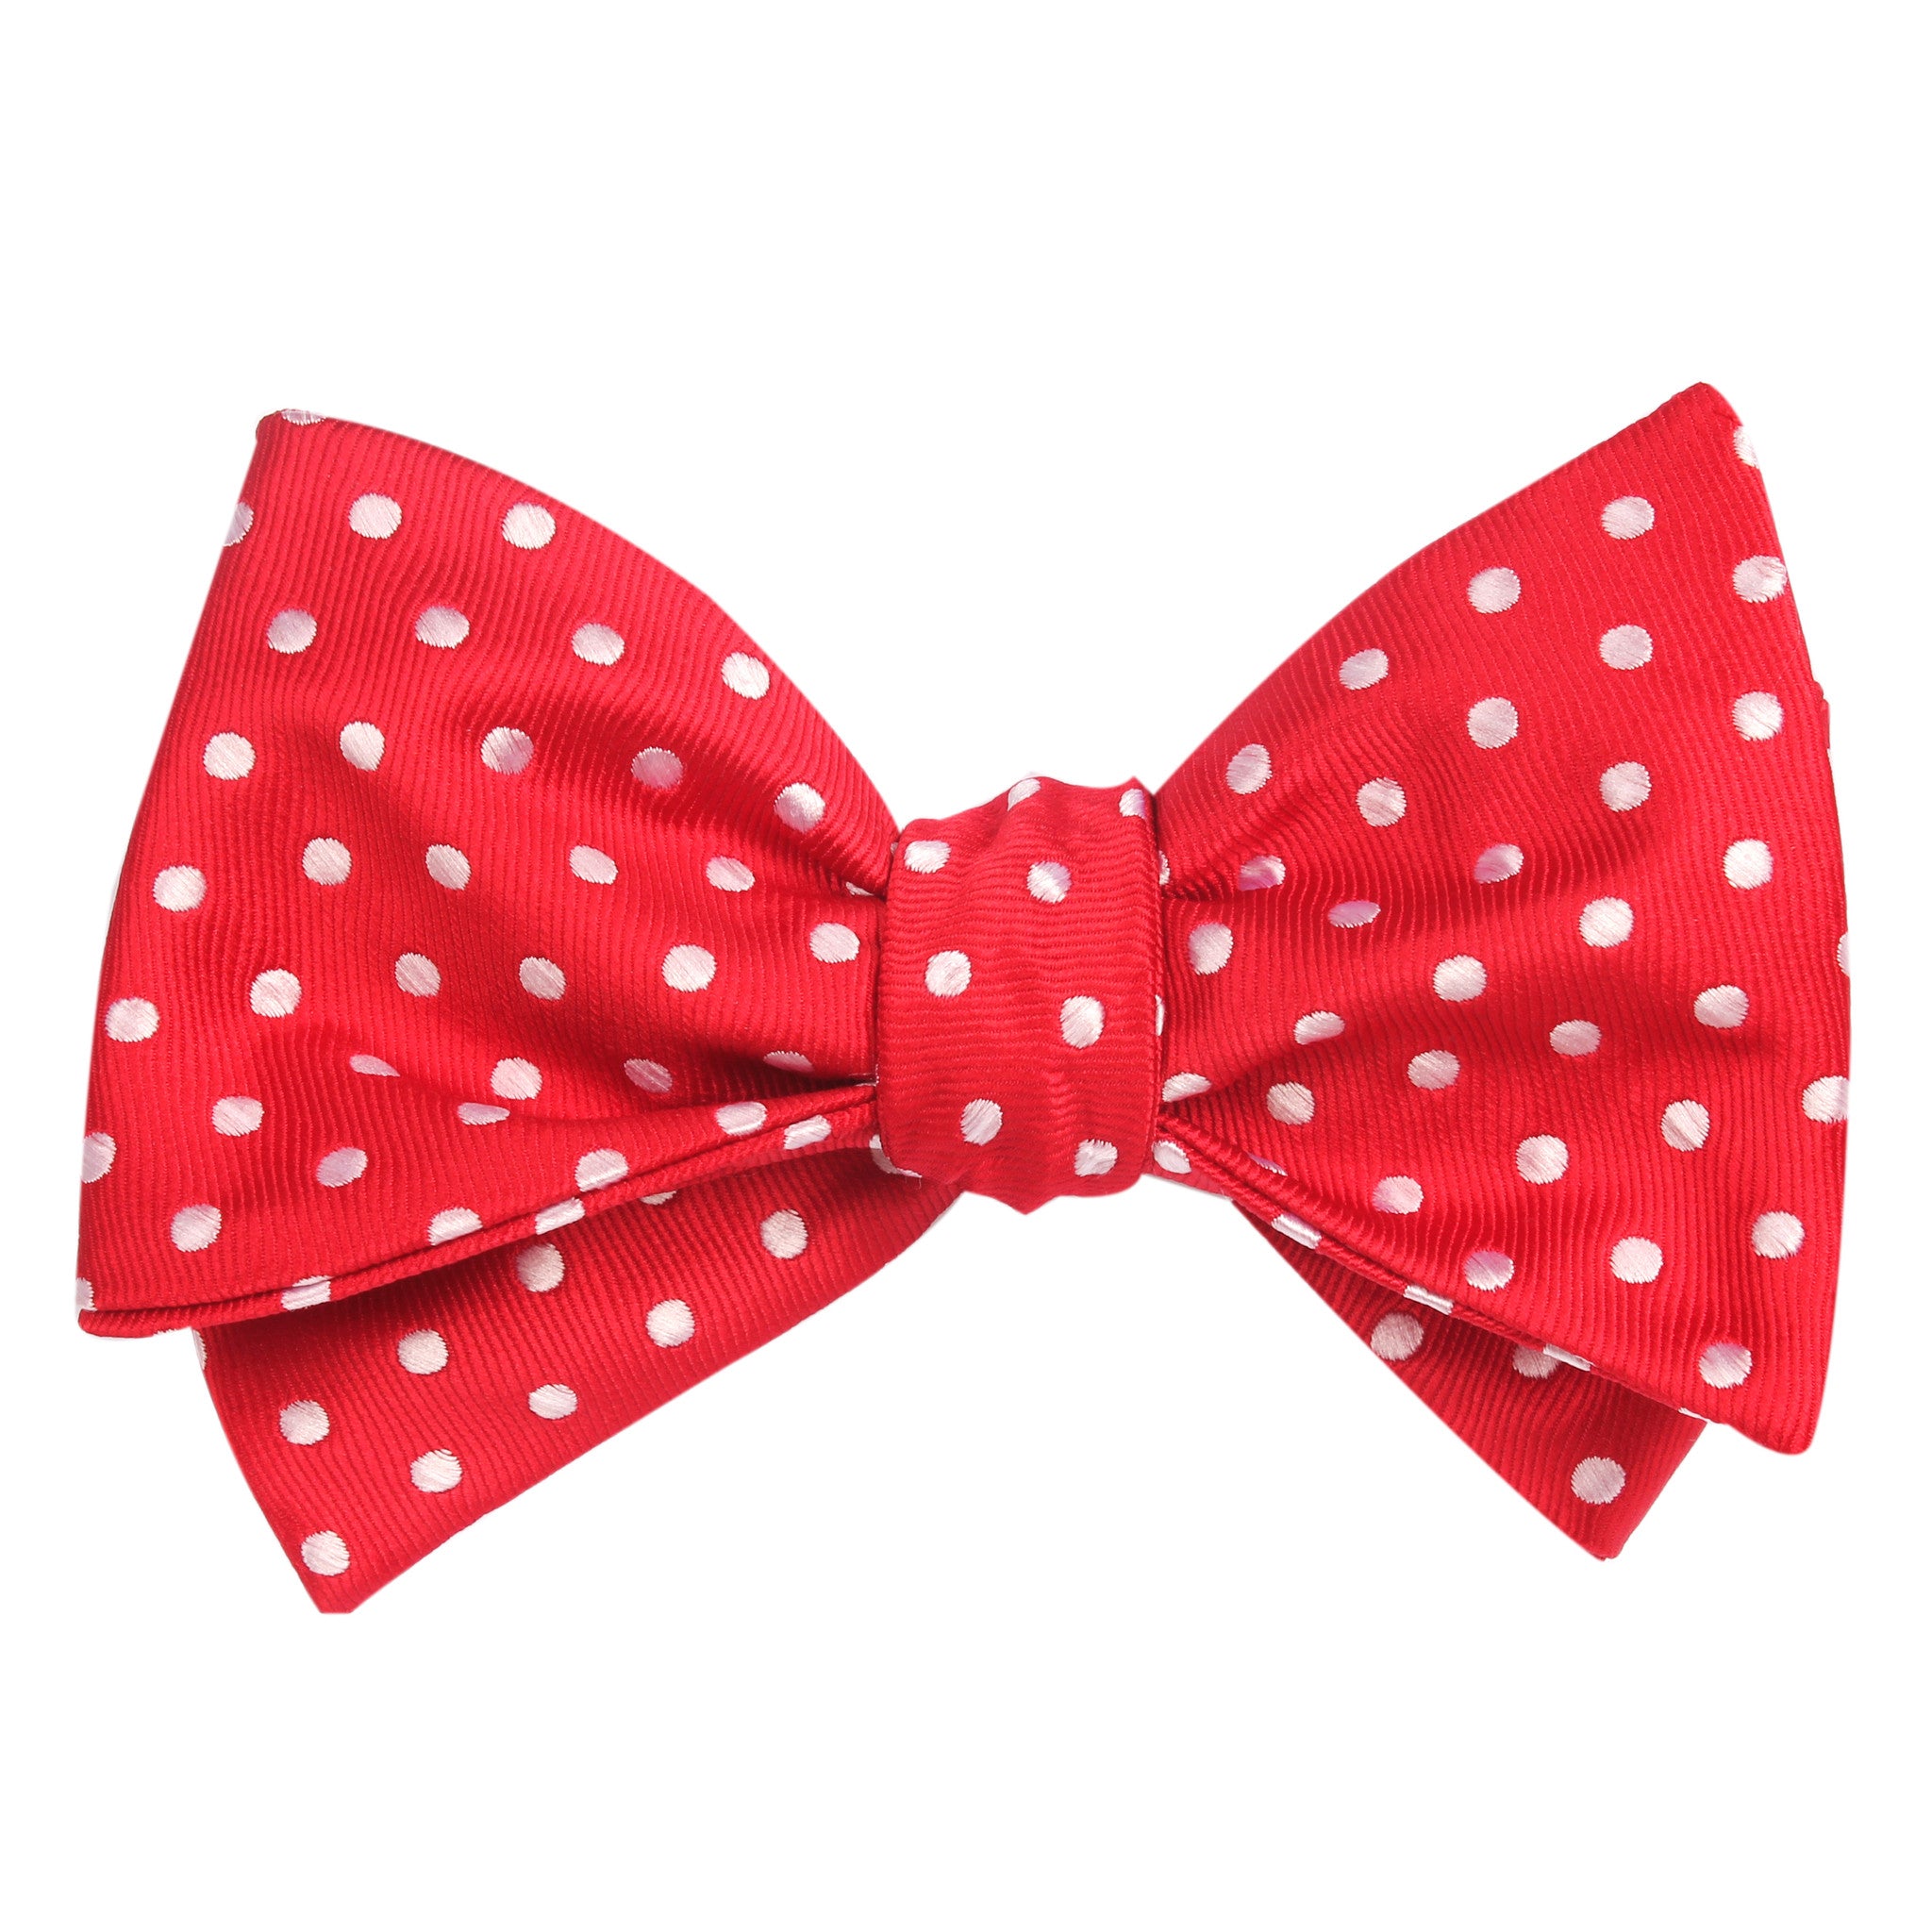 Royal Red Polka Dots Self Tie Bow Tie Self tied knot by OTAA